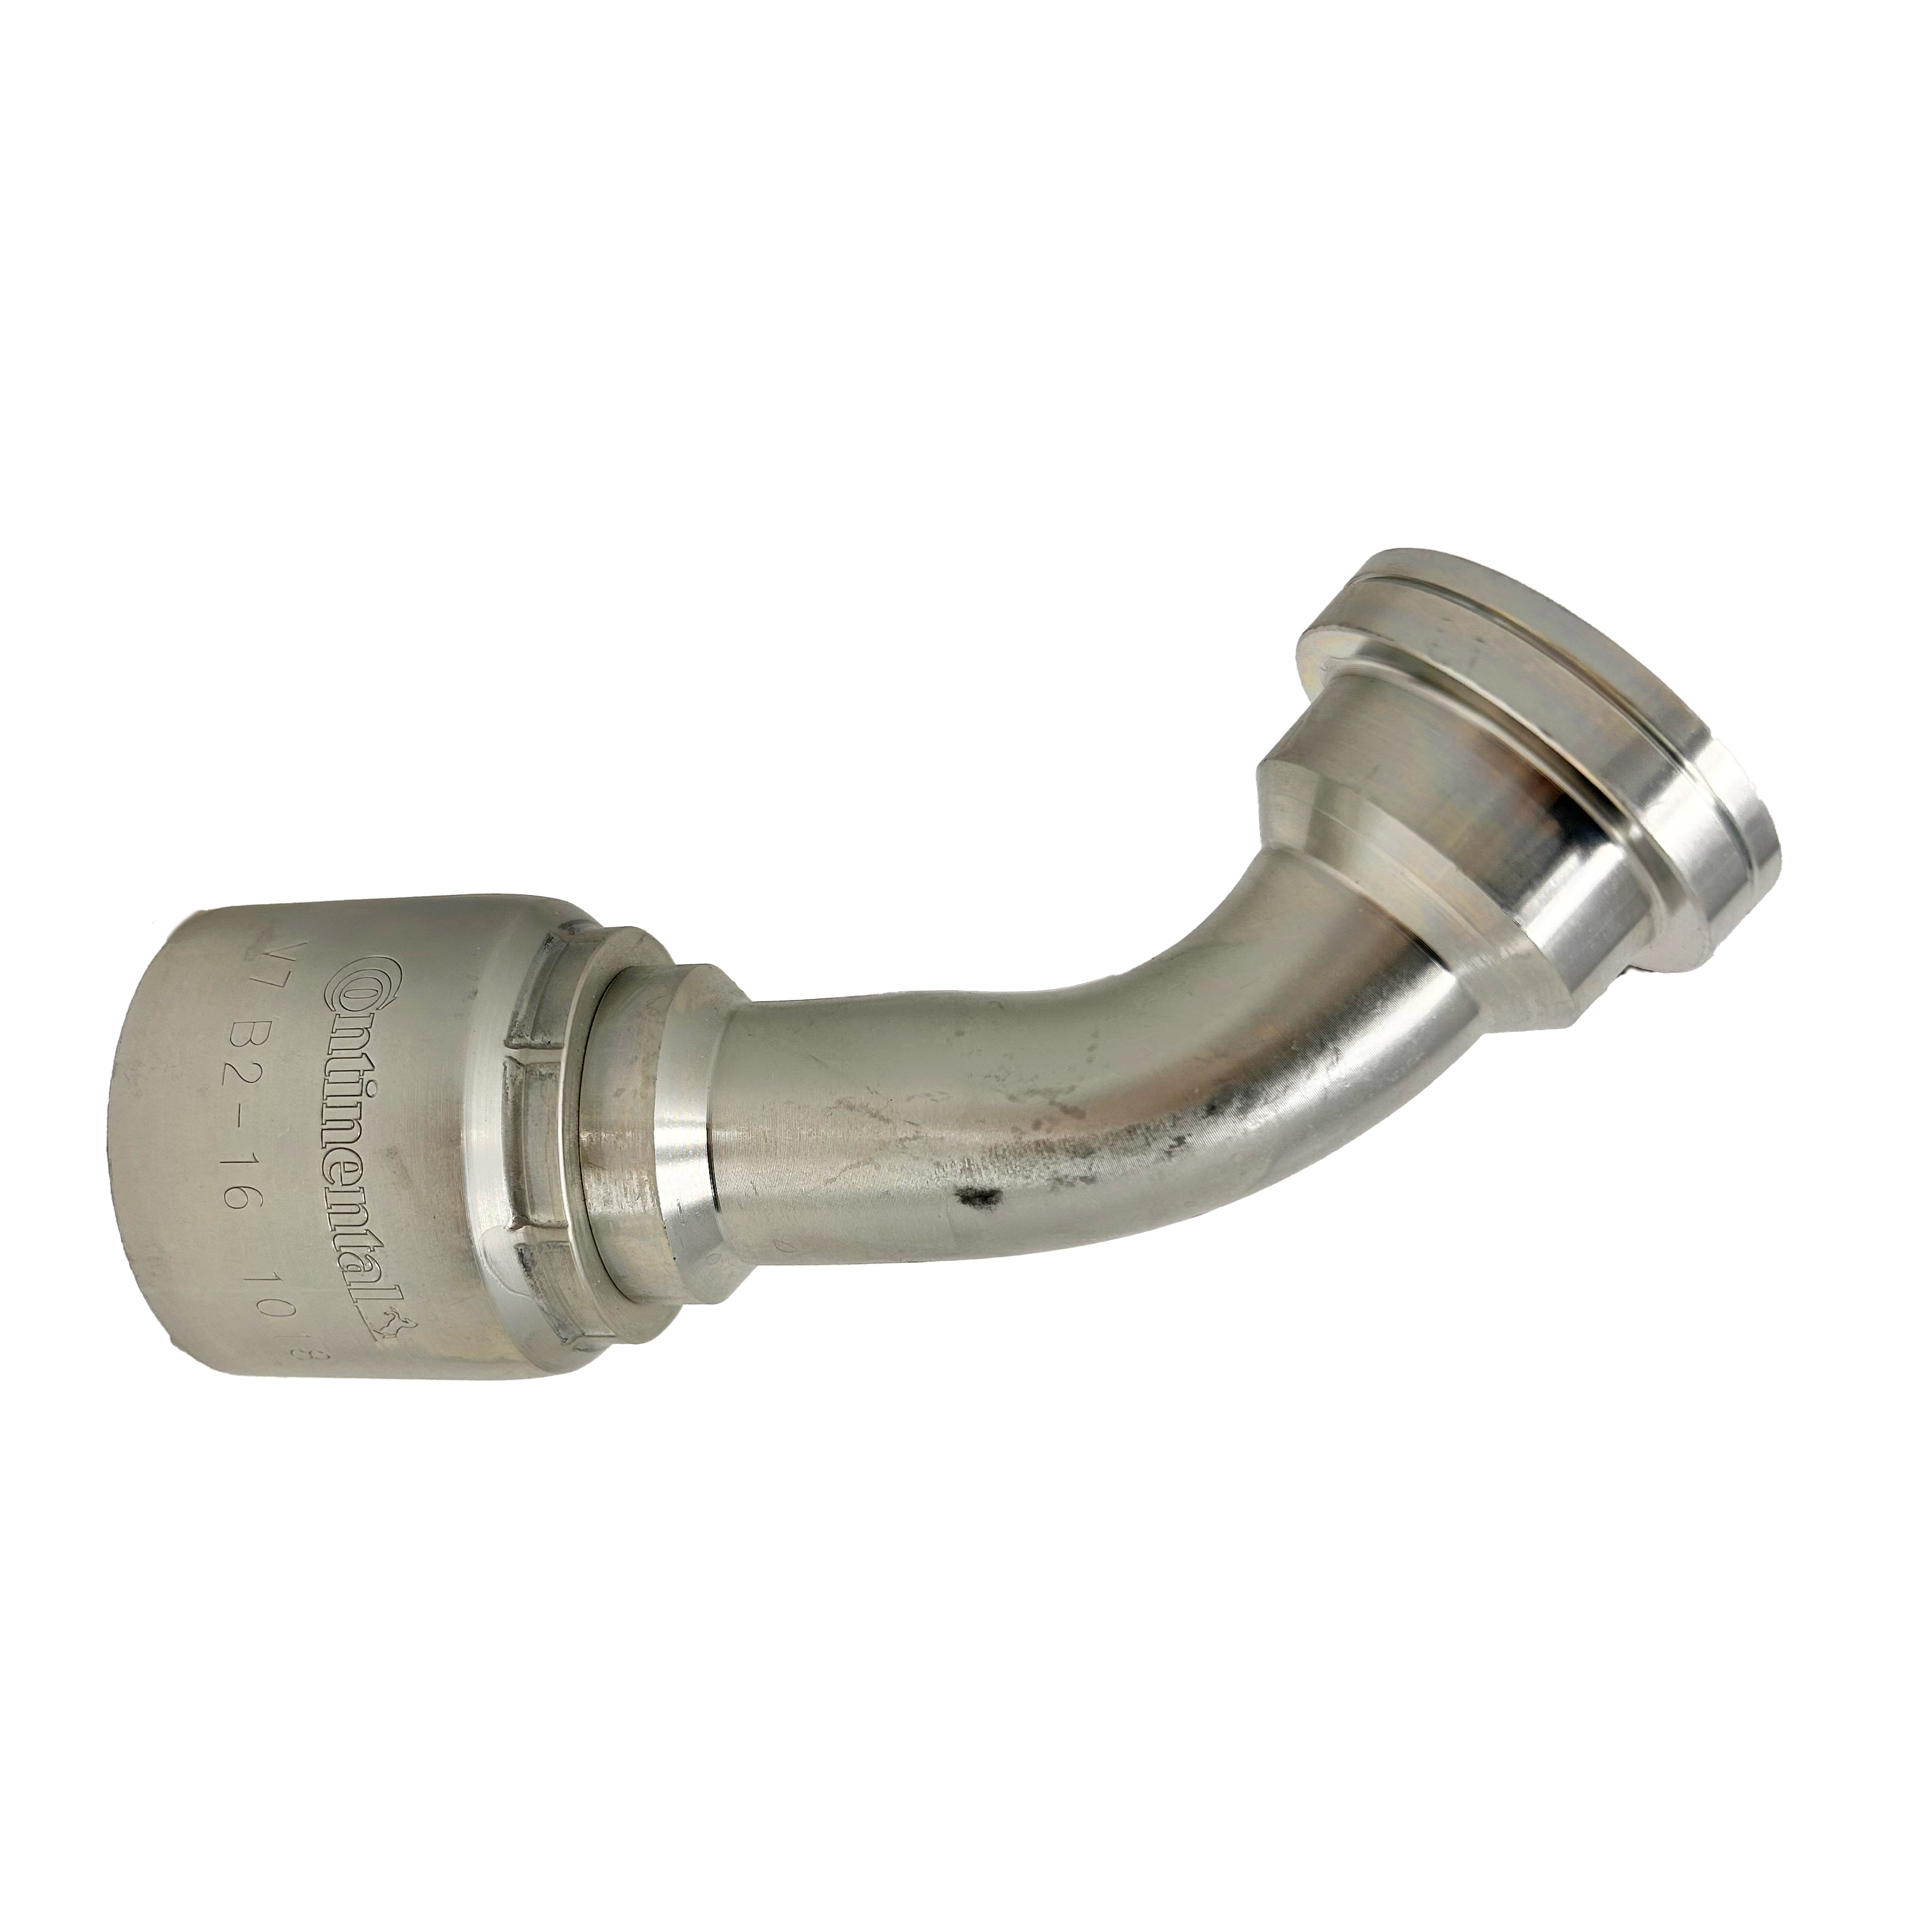 B2-FH45-3232: Continental Hose Fitting, 2" Hose ID x 2" Code 62, 45-Degree Connection